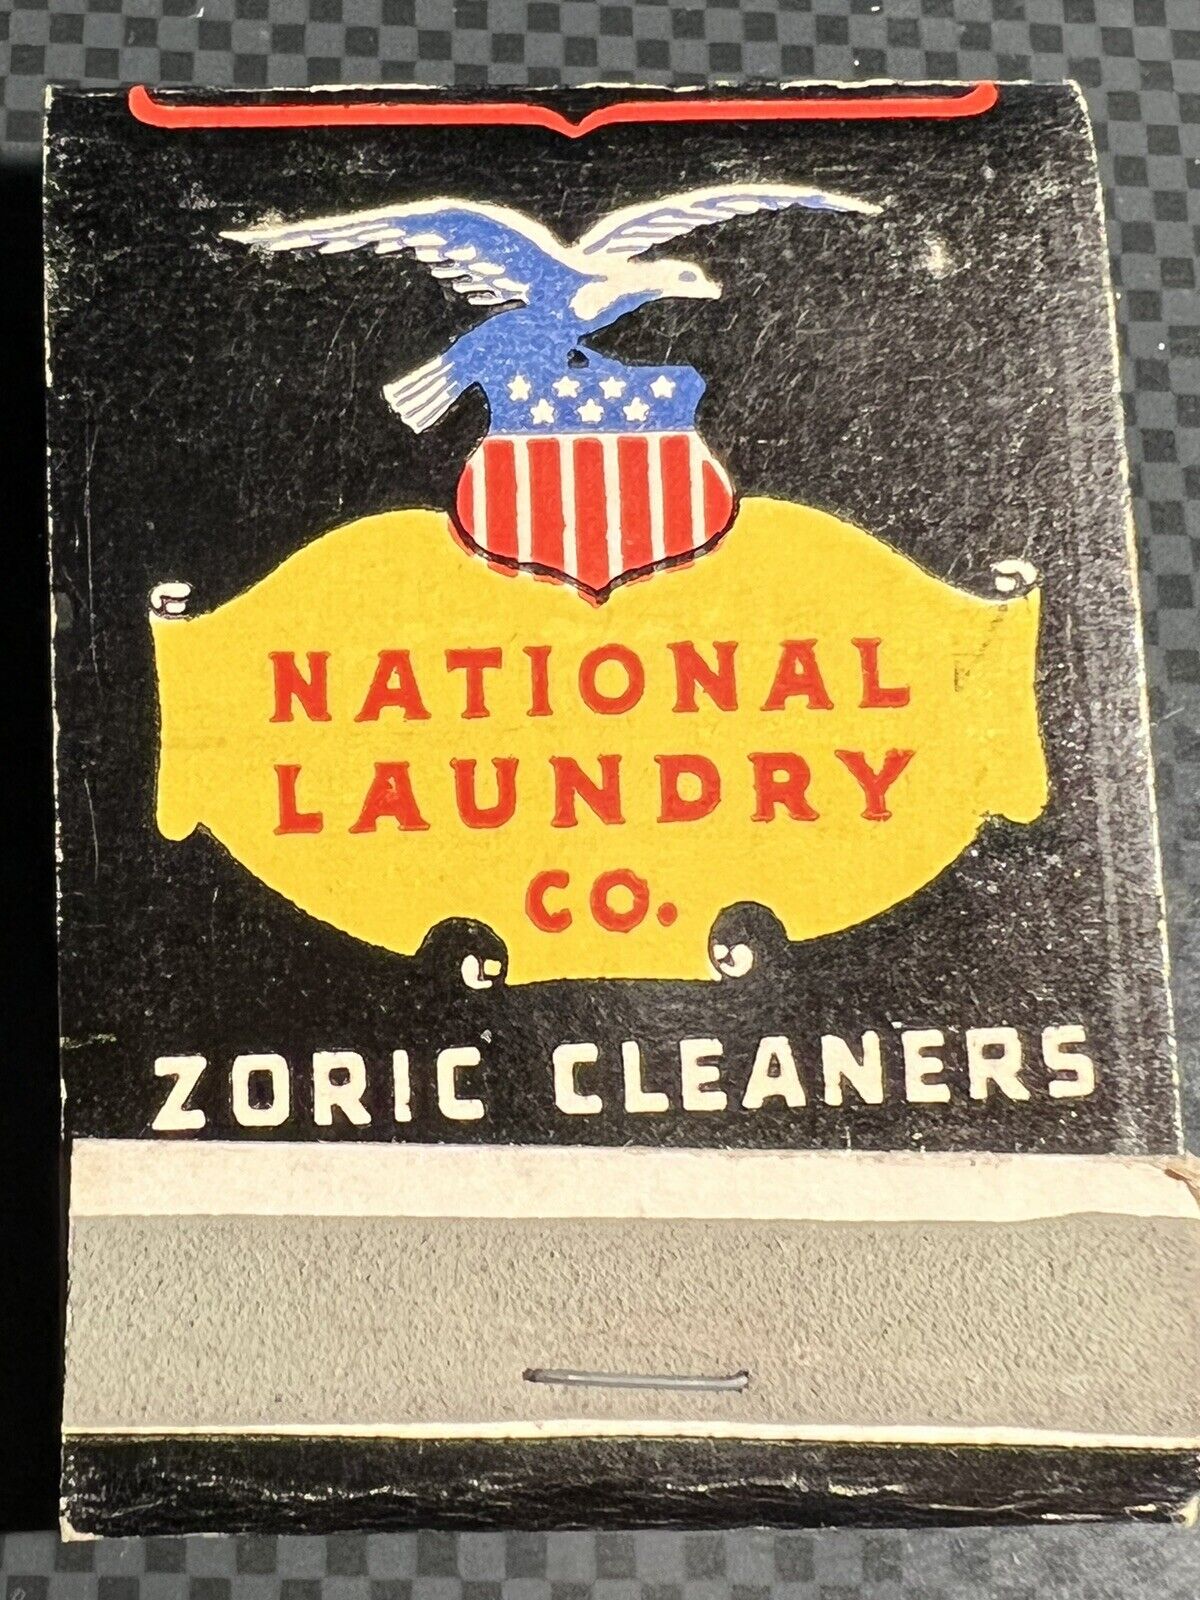 VINTAGE MATCHBOOK - NATIONAL LAUNDRY CO. - ZORIC CLEANERS -  FRONT STRIKE